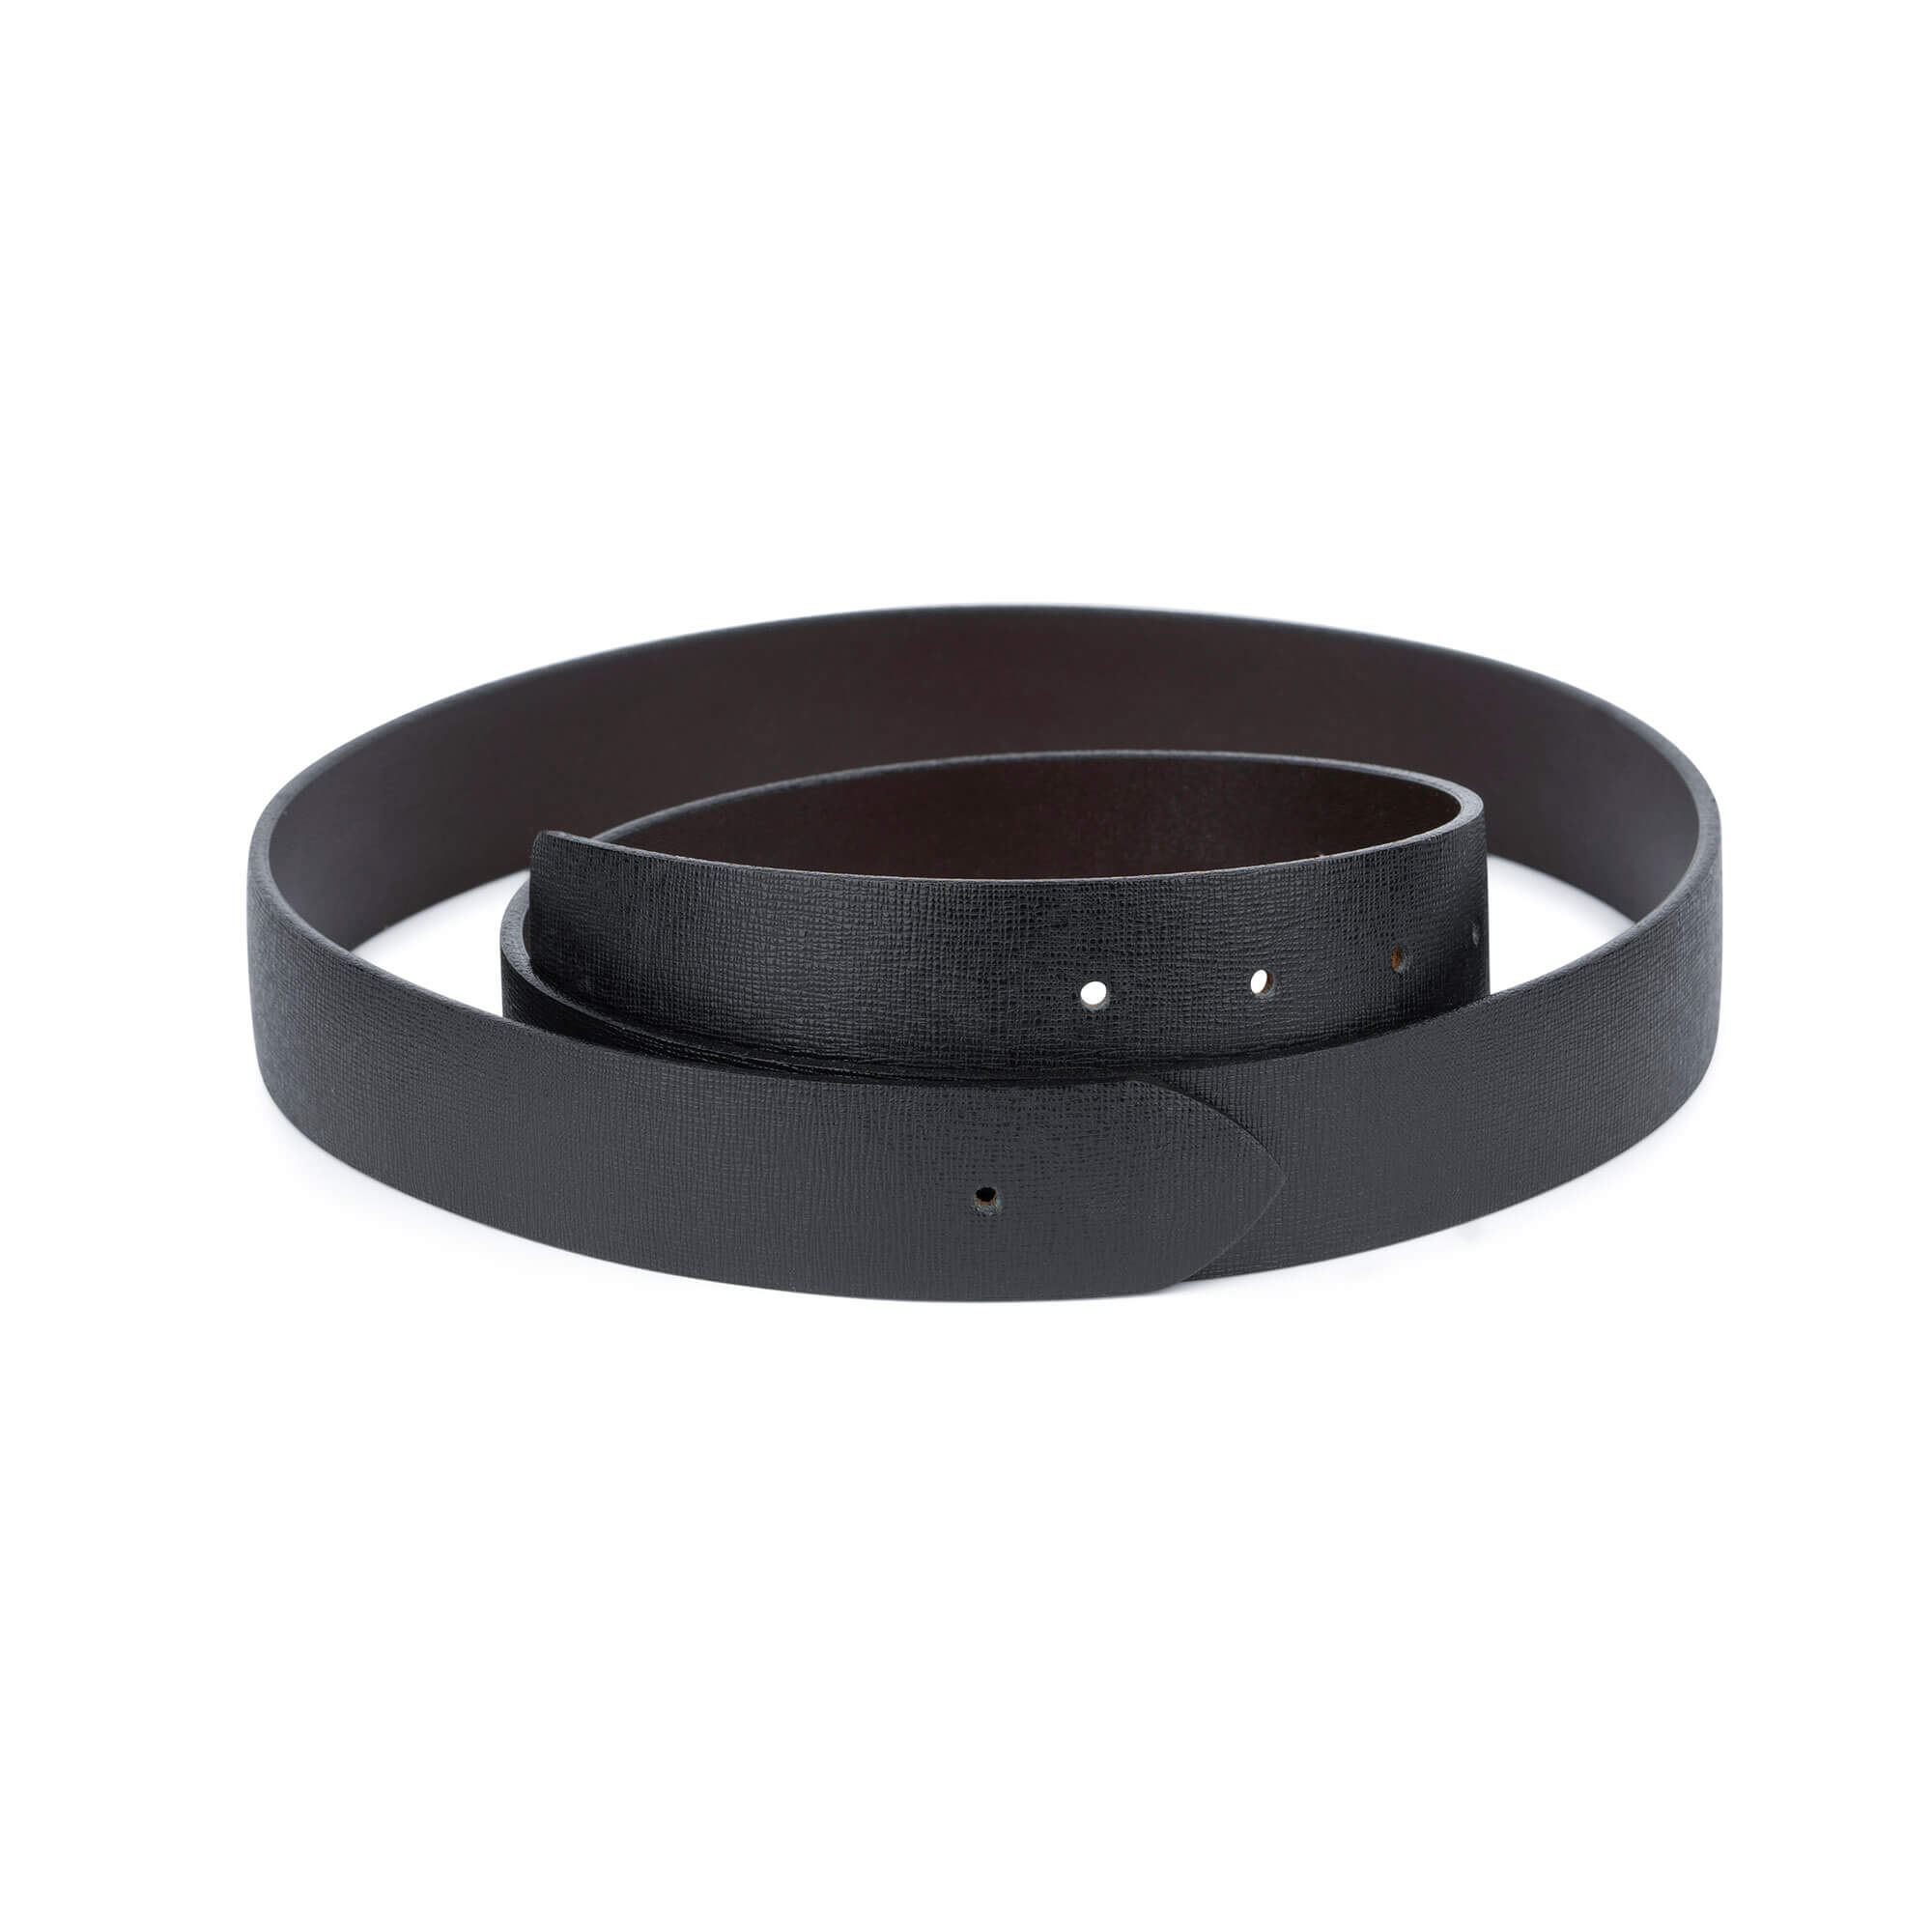 Buy Saffiano Leather Belt Strap Without Buckle | Capo Pelle